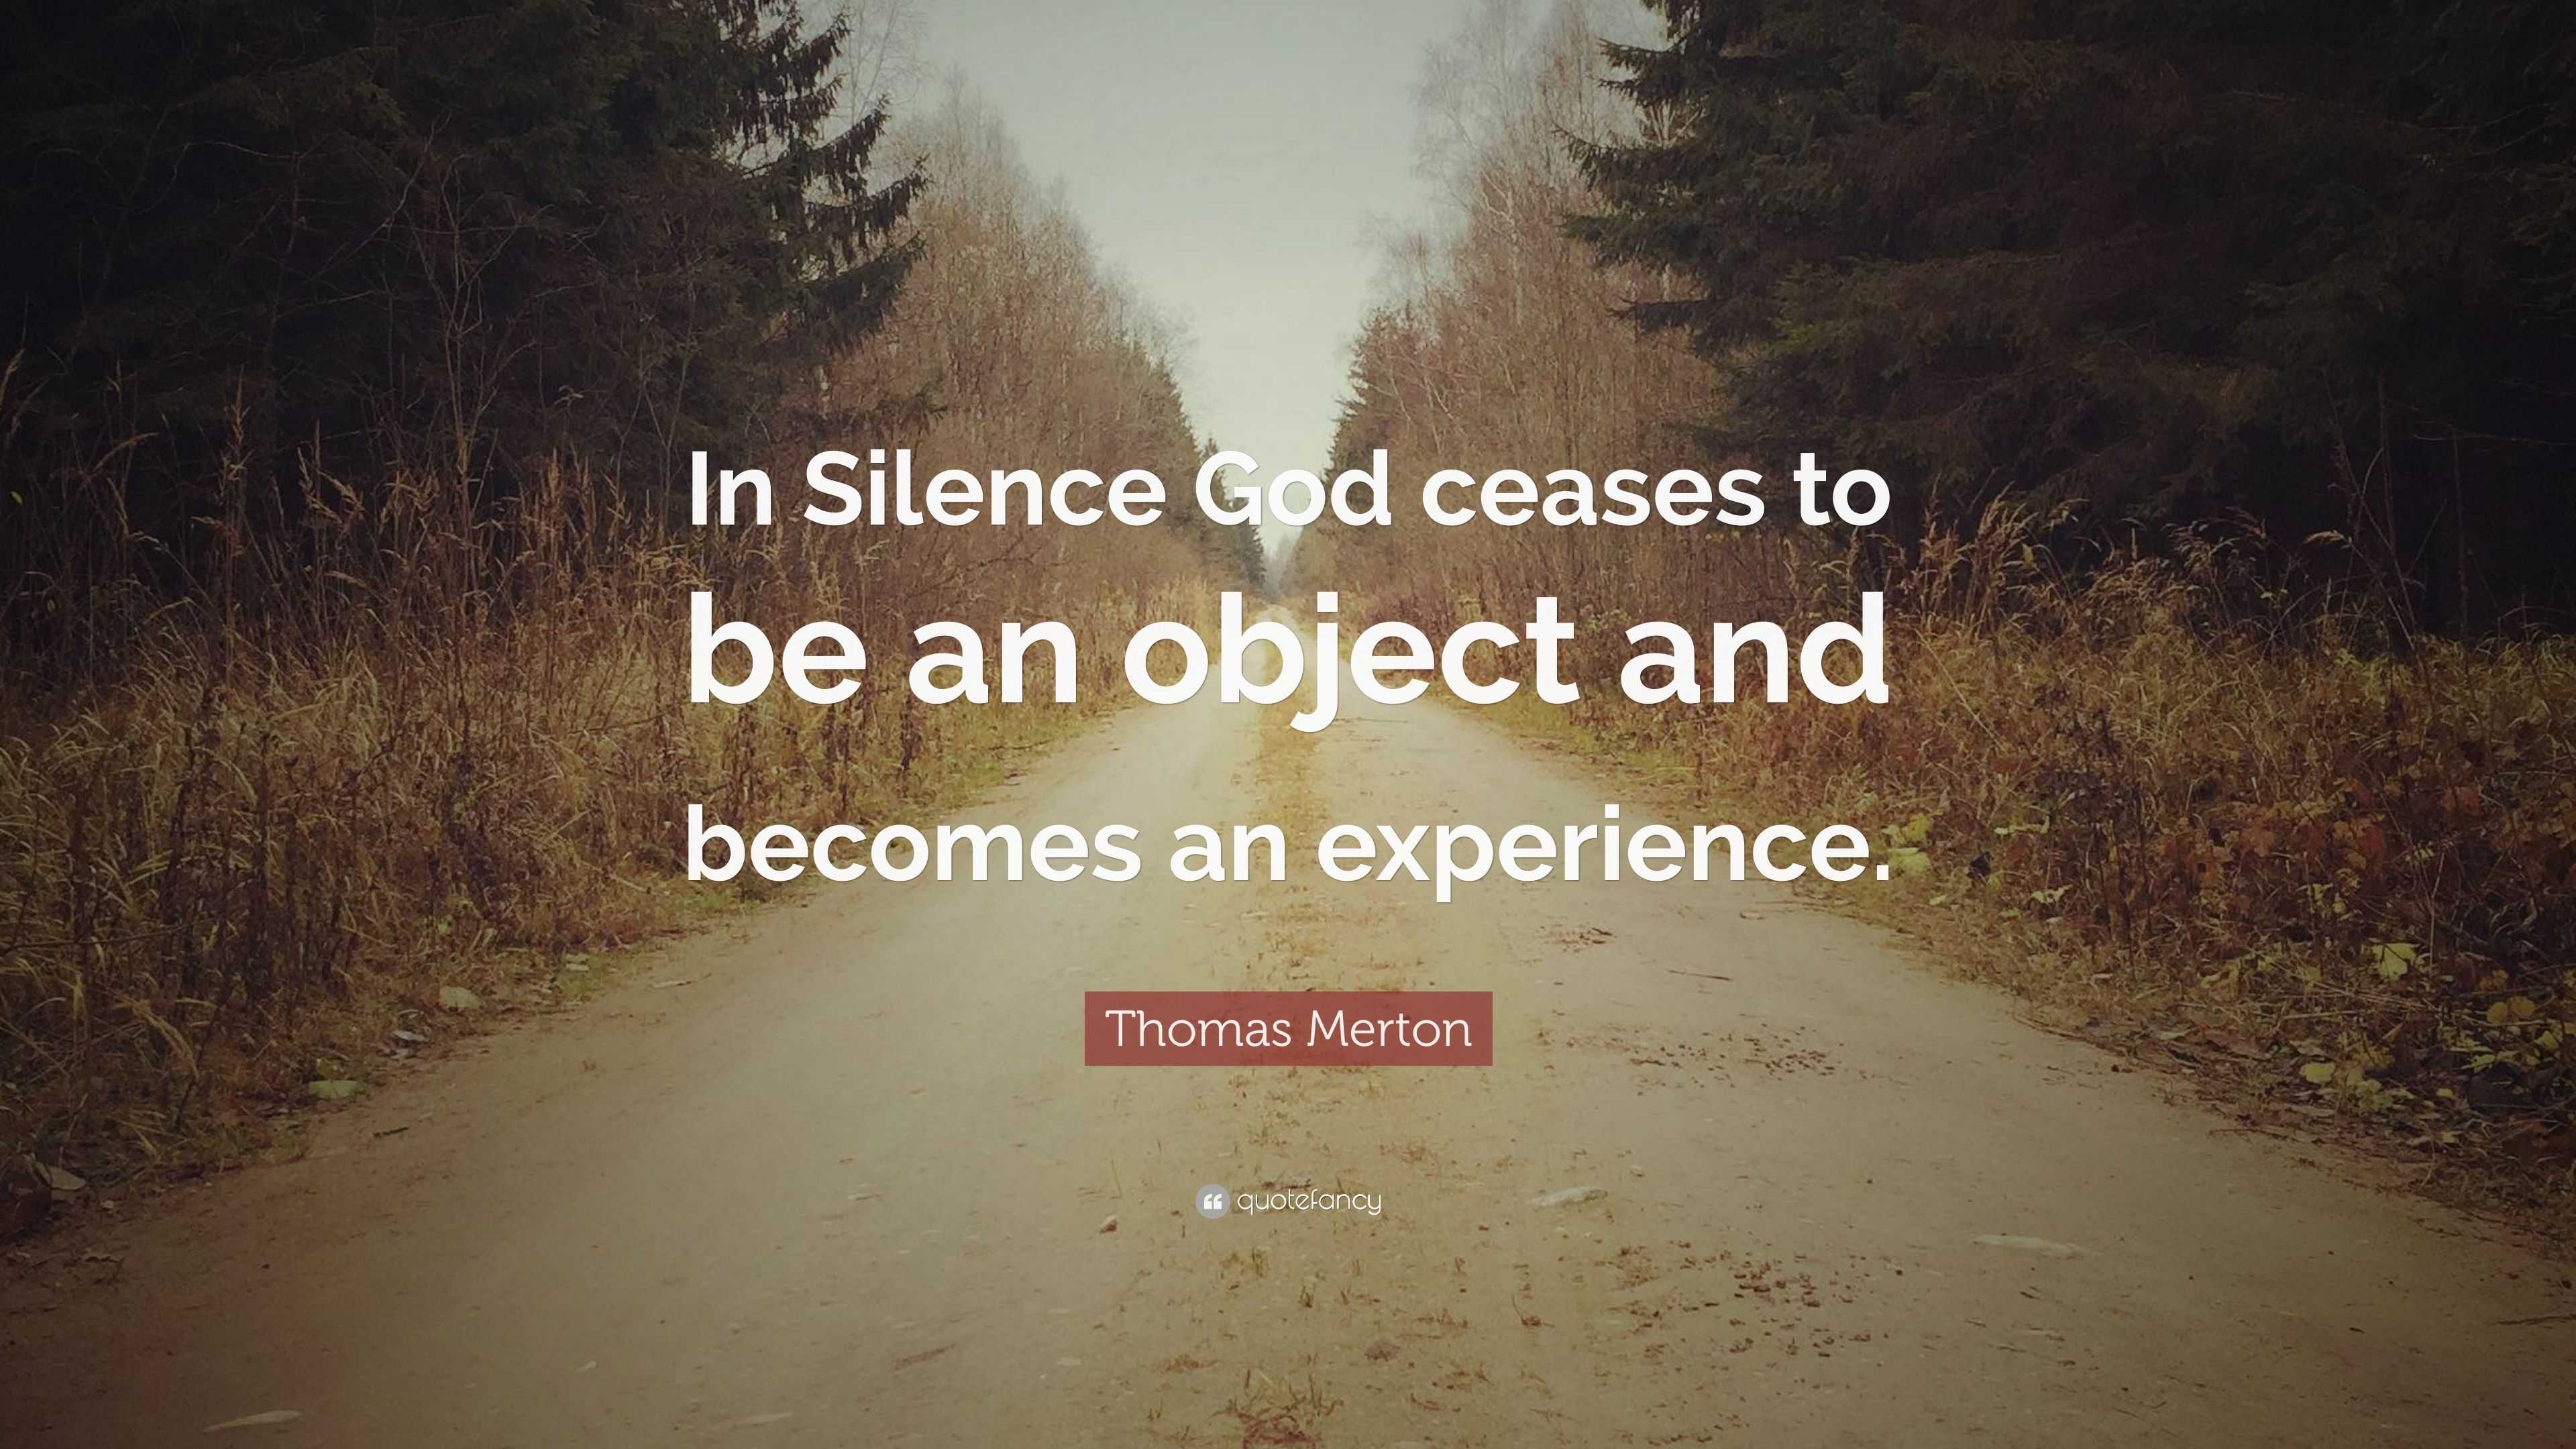 2104374 Thomas Merton Quote In Silence God ceases to be an object and